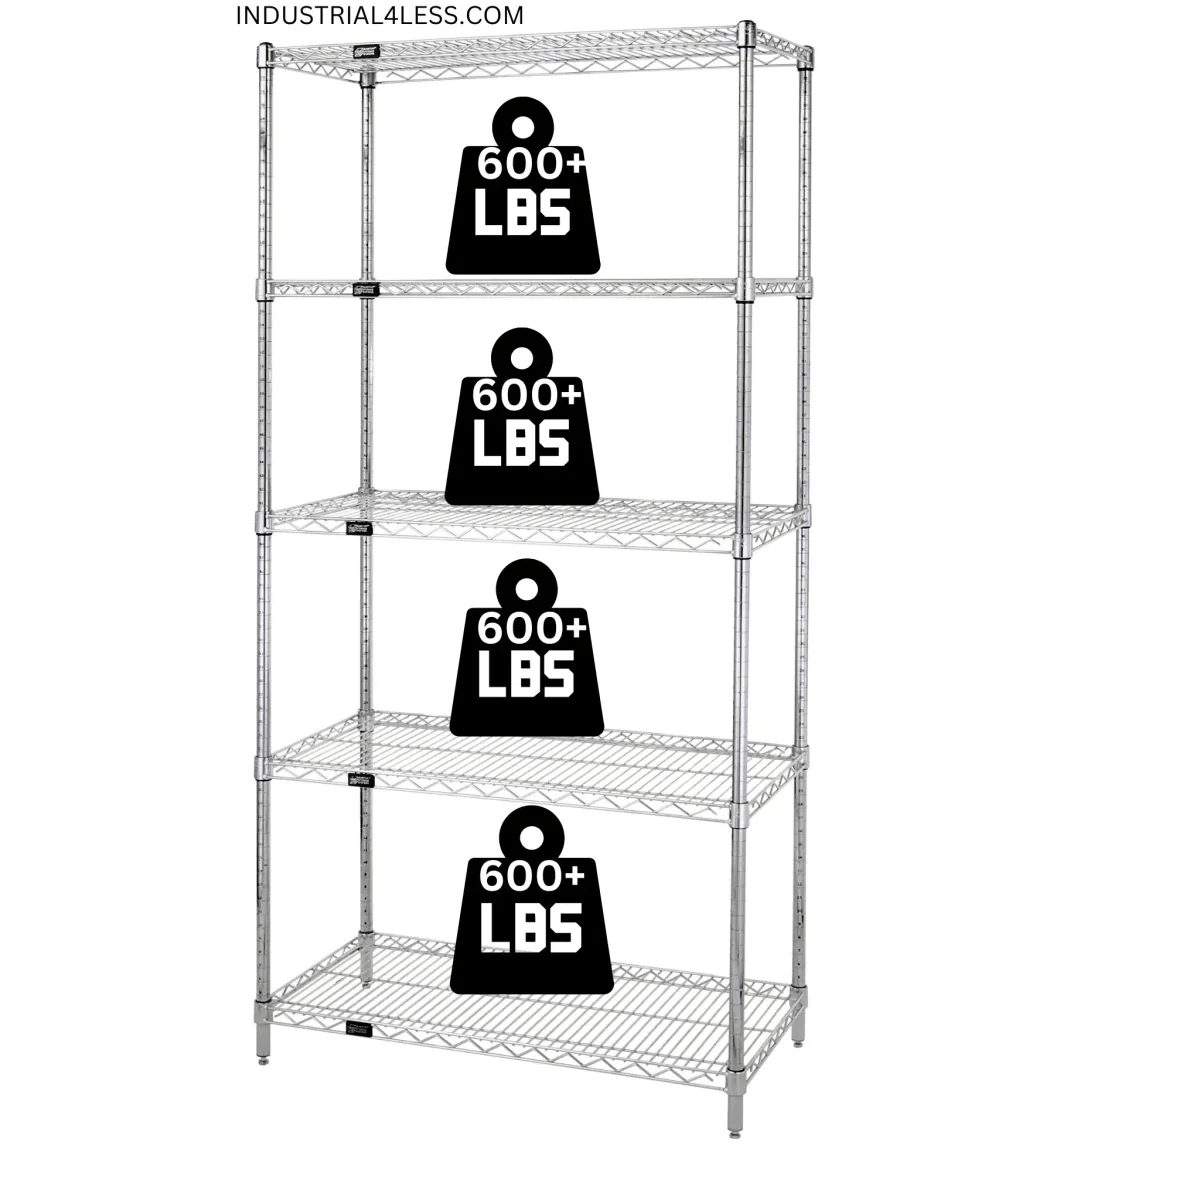 12" x 48" Stainless Steel Wire Shelving Unit - Industrial 4 Less - 12485S-5